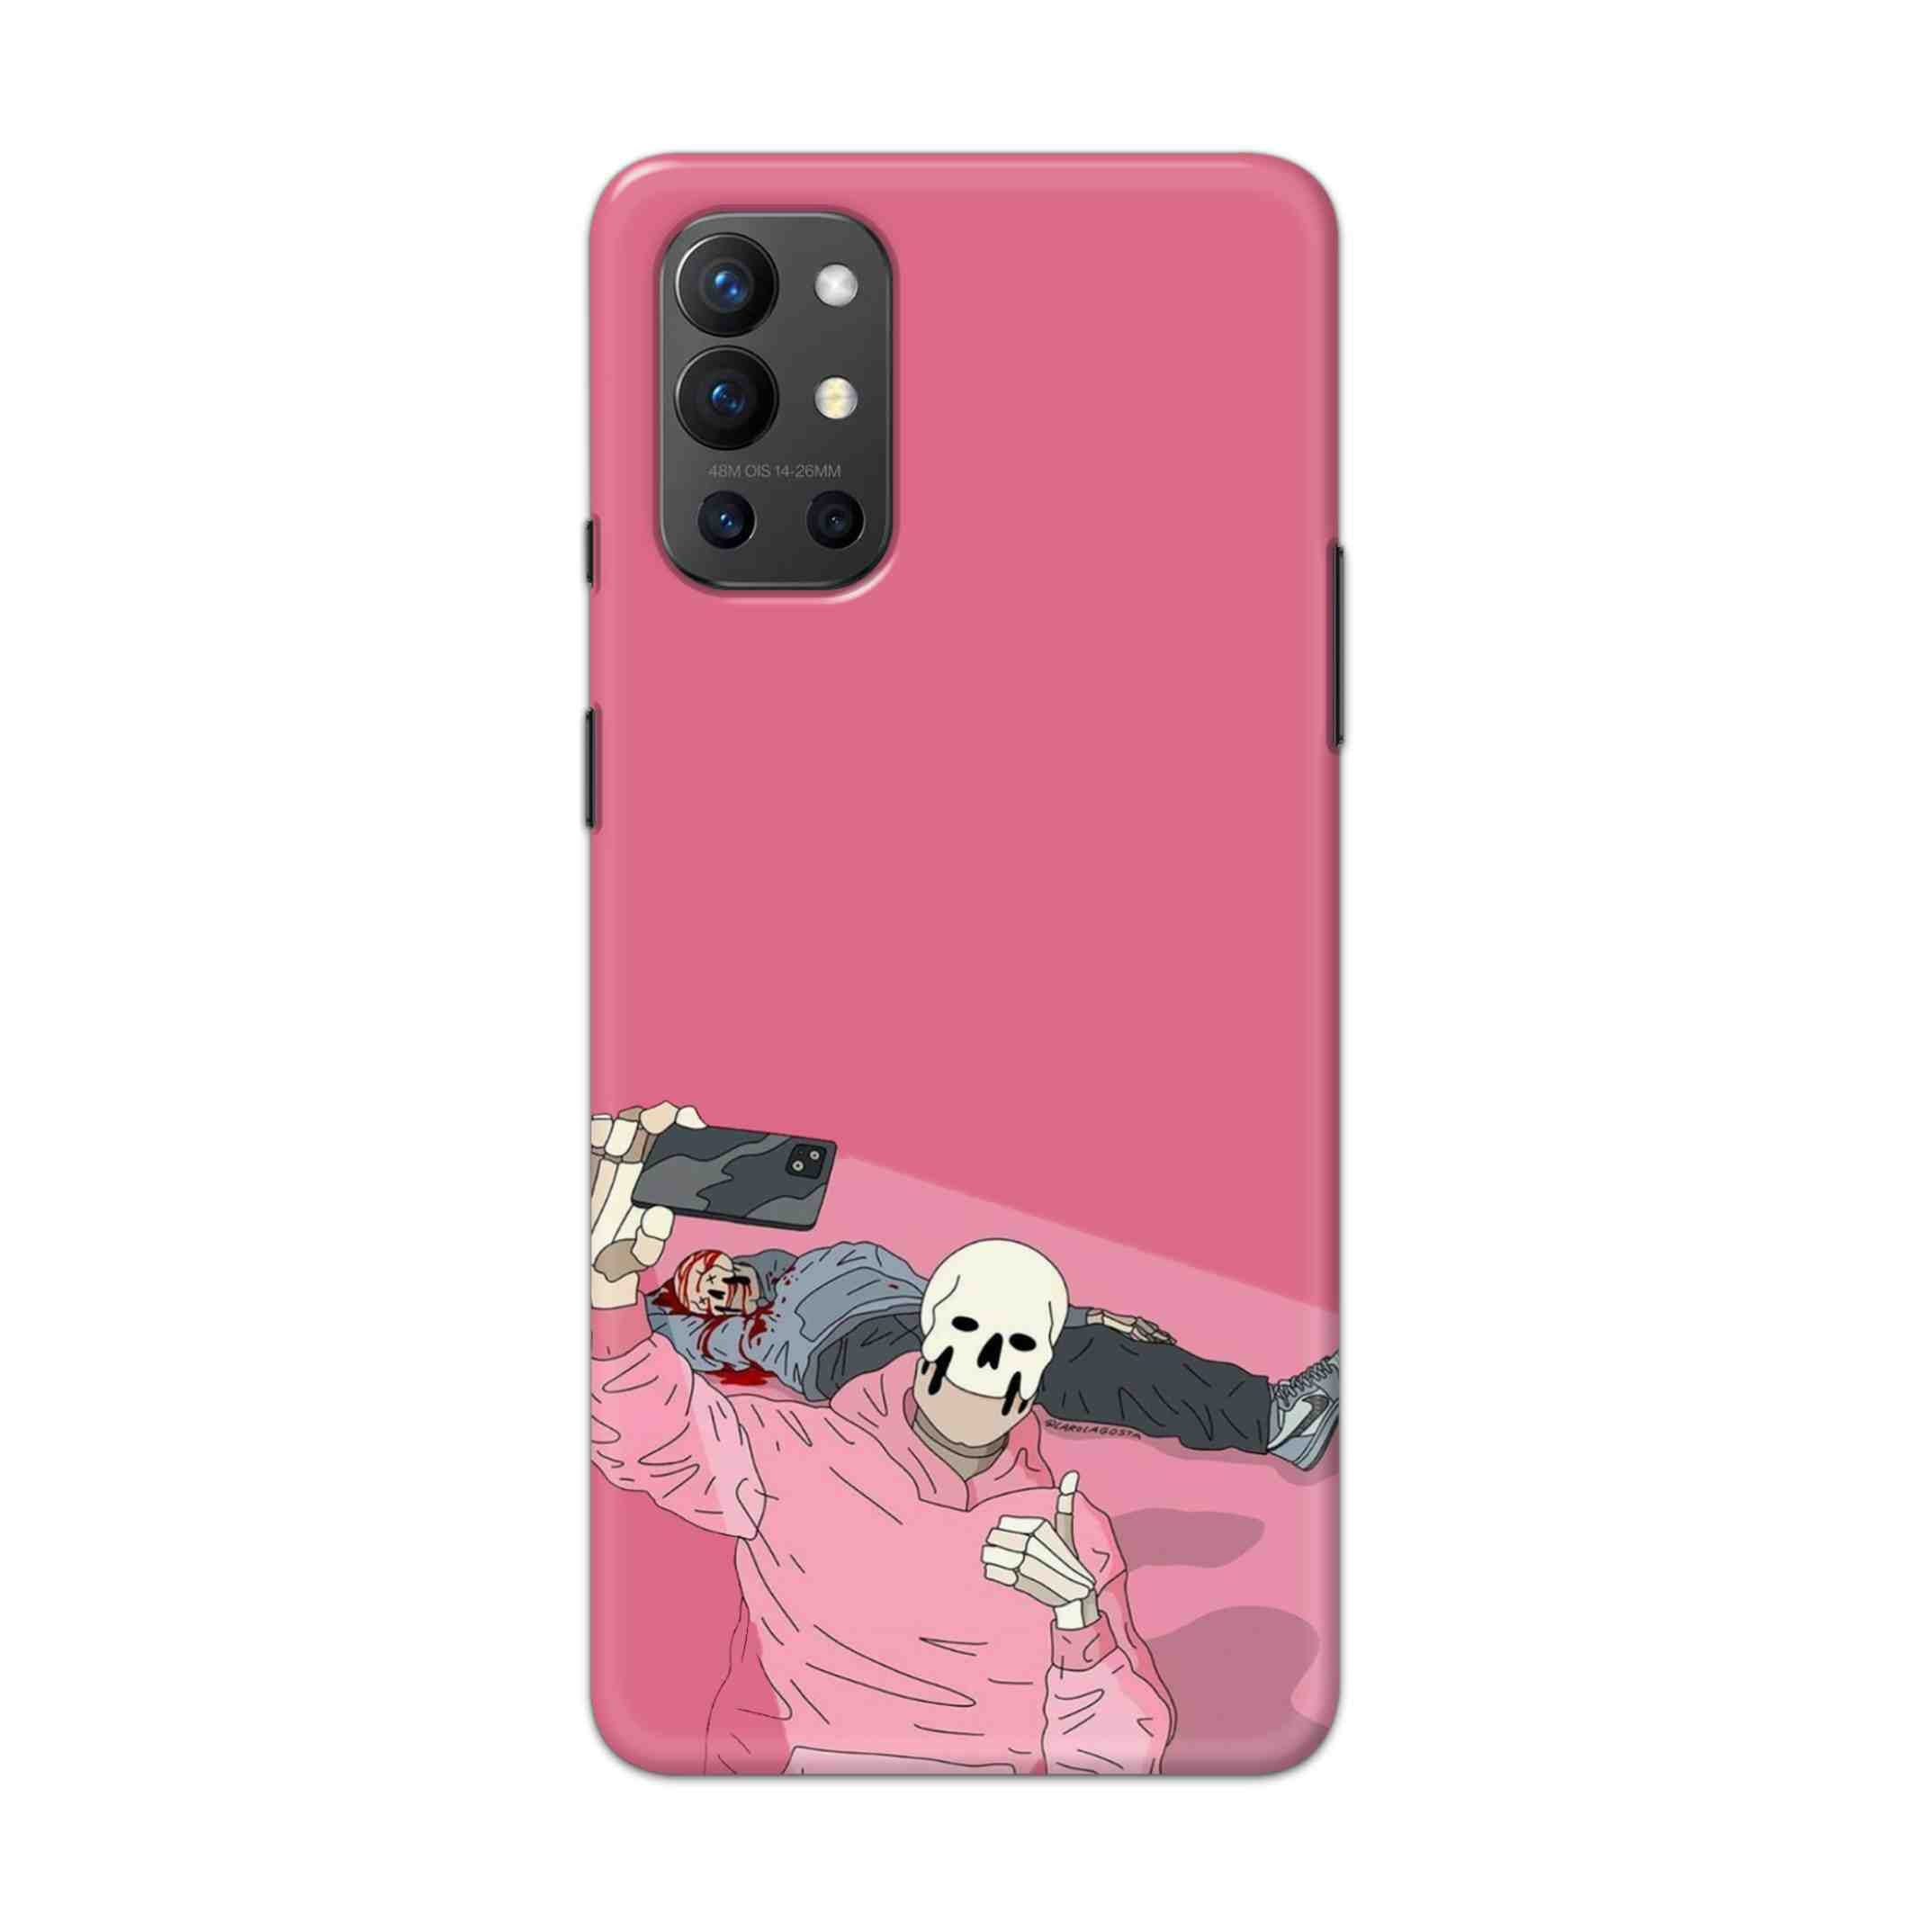 Buy Selfie Hard Back Mobile Phone Case Cover For OnePlus 9R / 8T Online